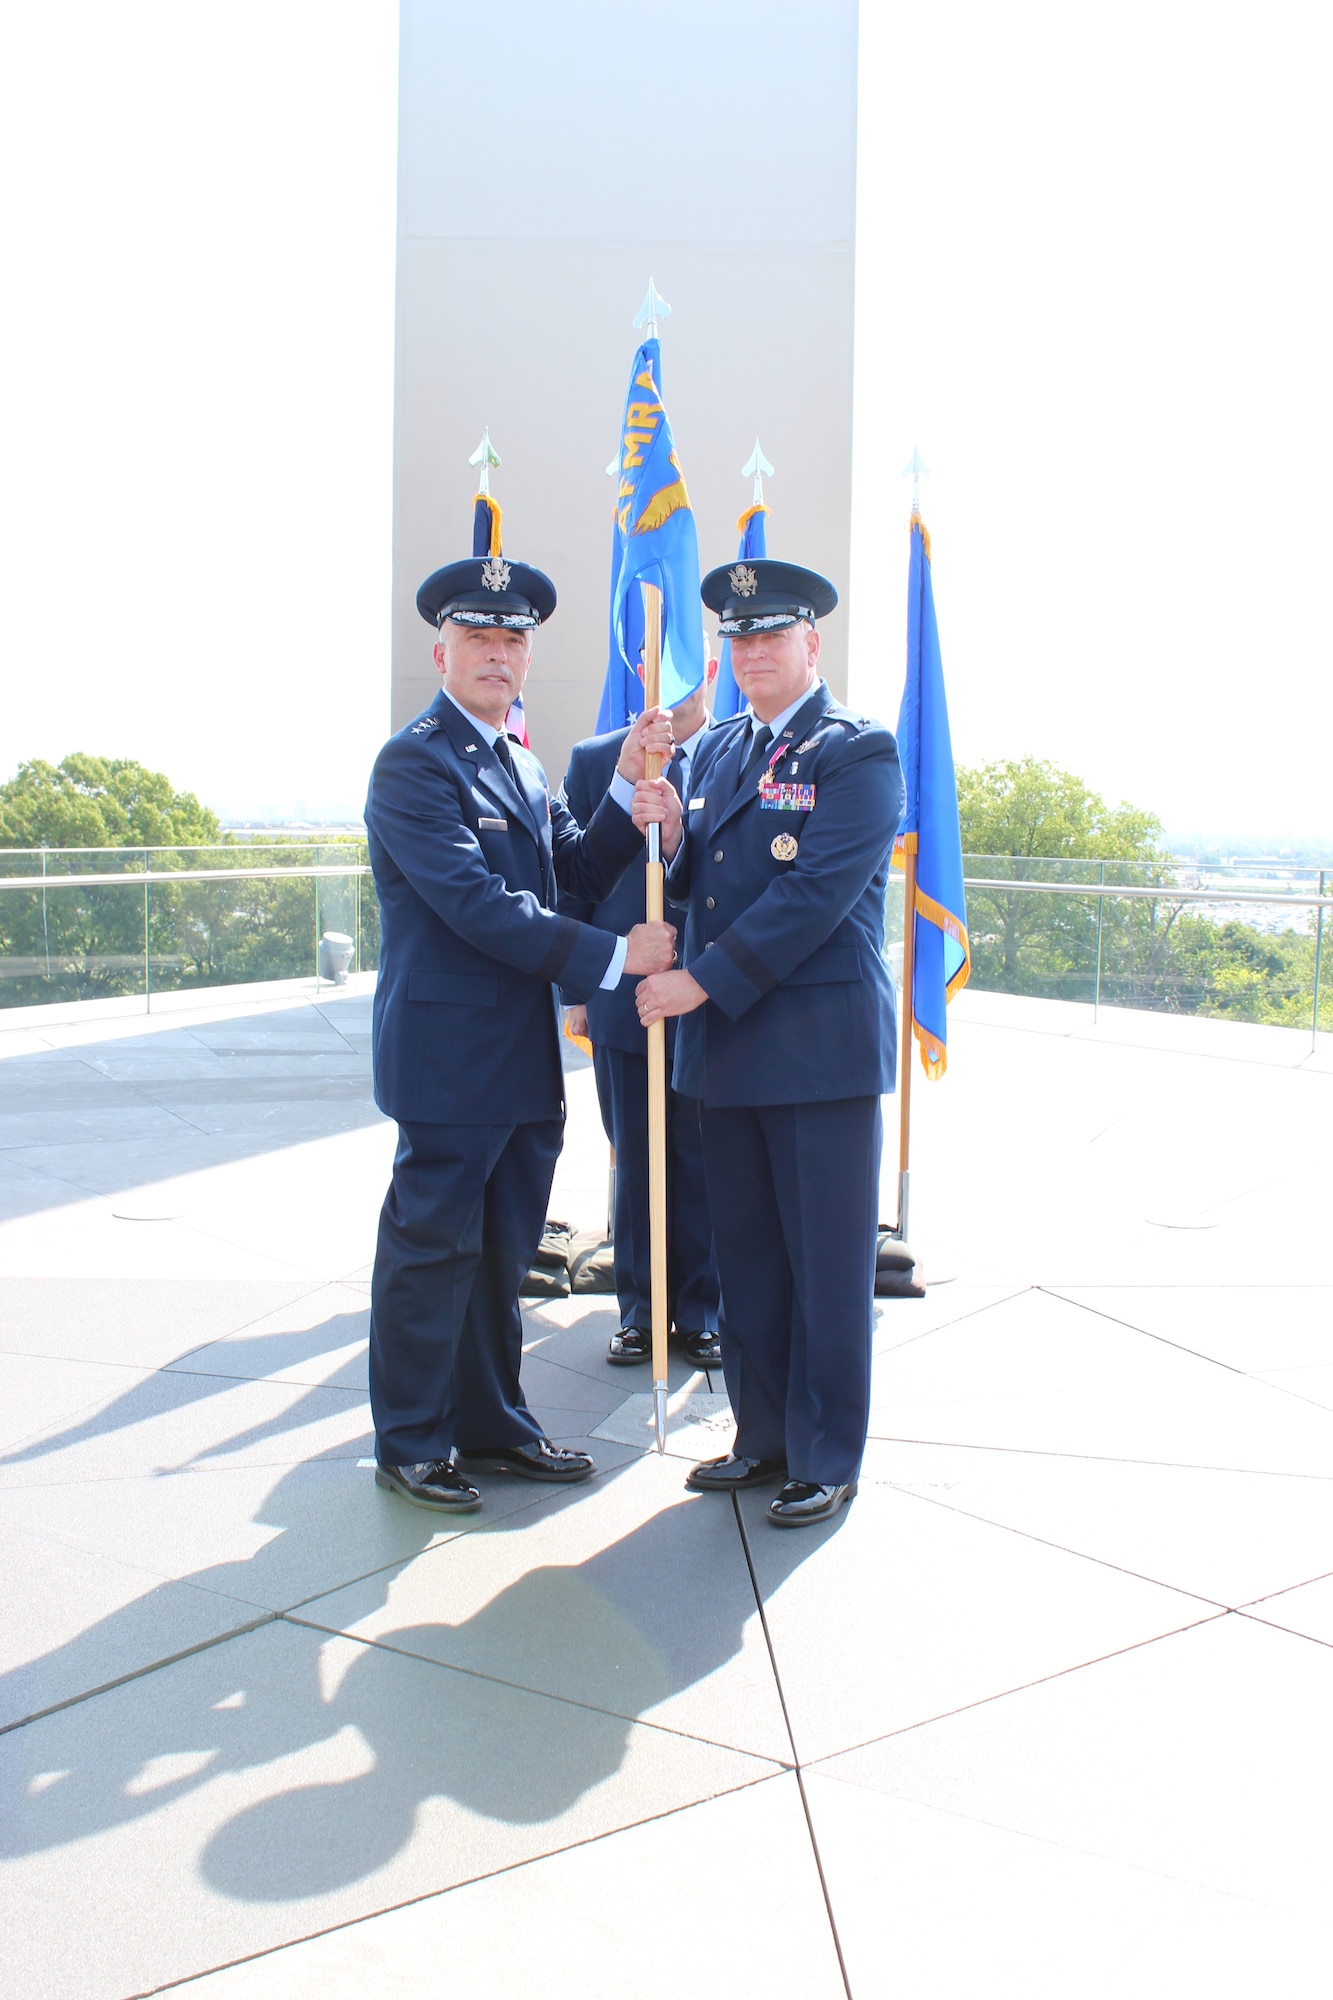 Image of two Airmen holding a guidon.